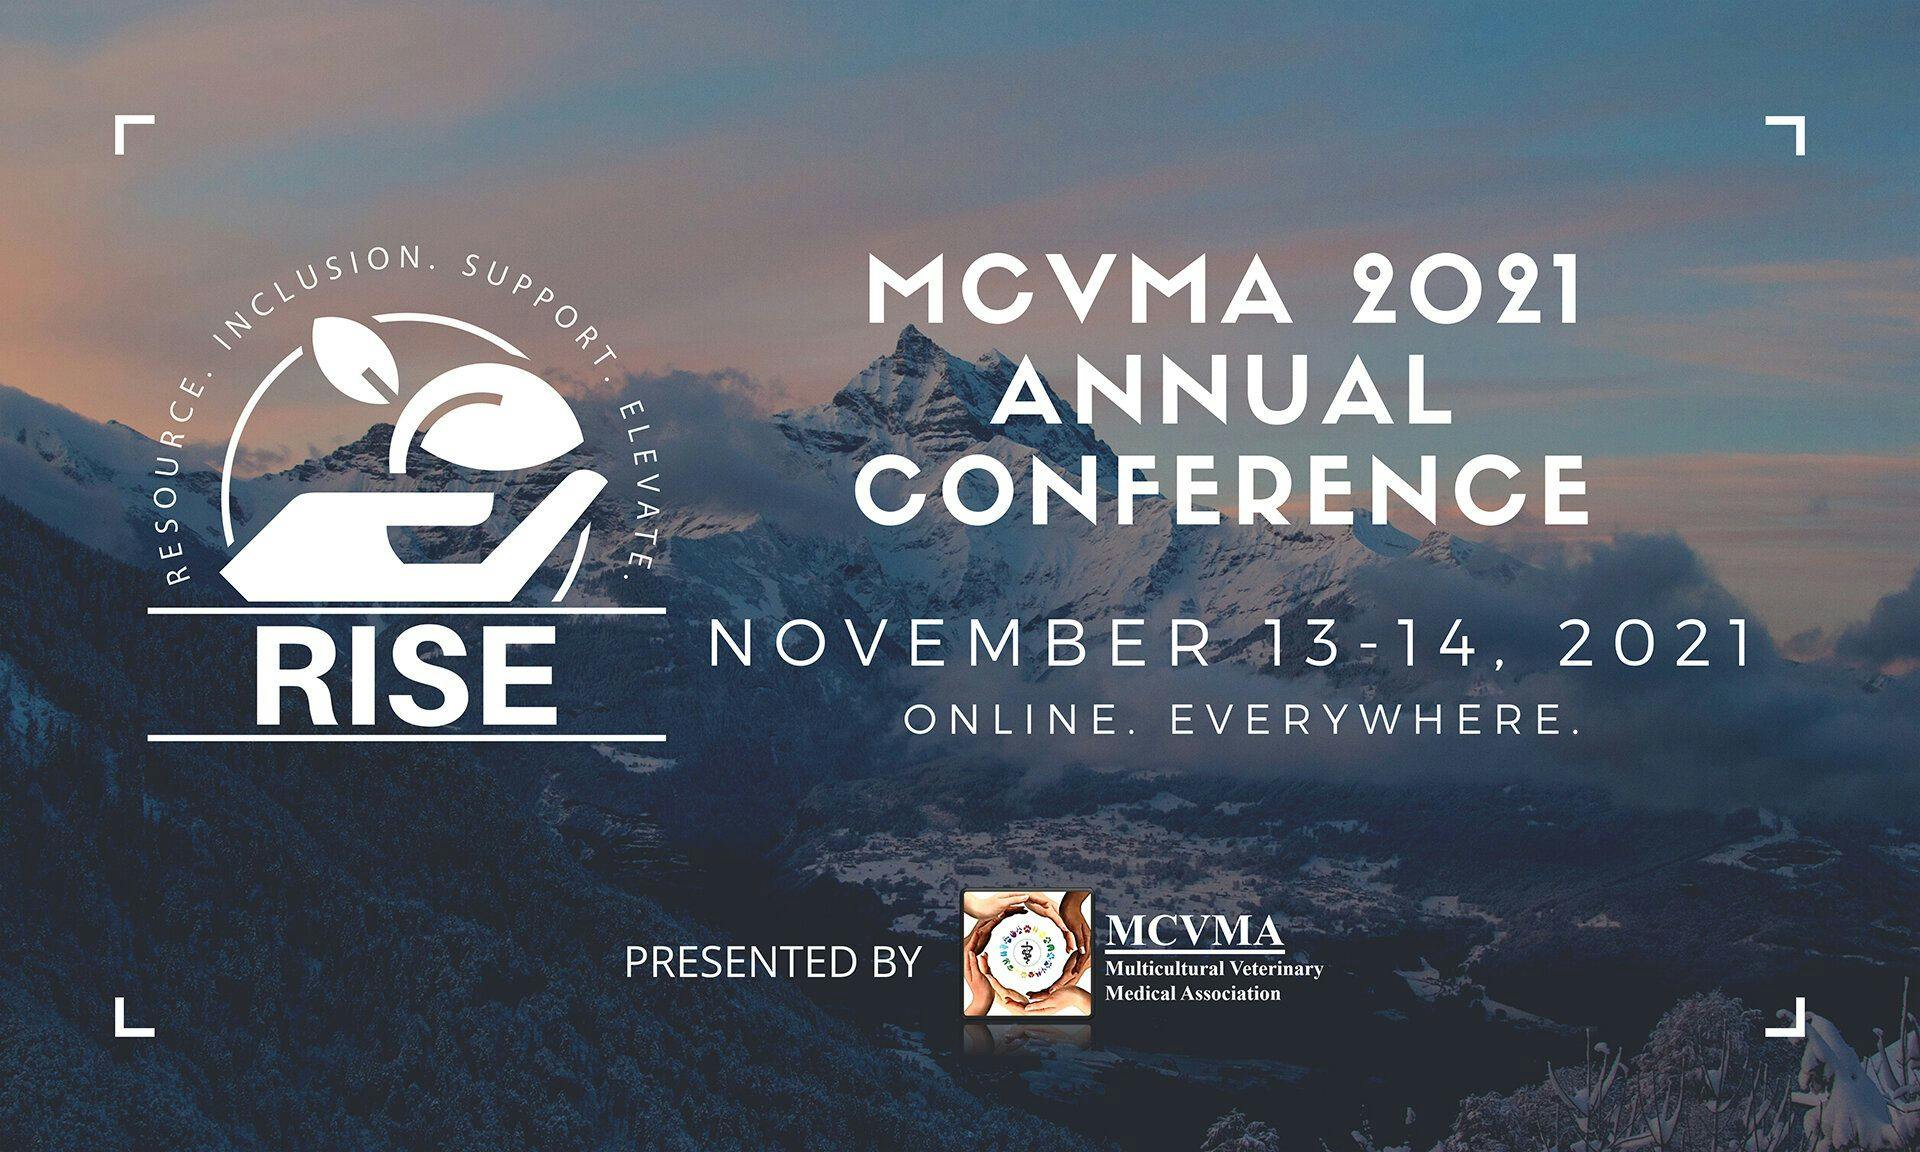 Multicultural Veterinary Medical Association to host inaugural RISE virtual conference